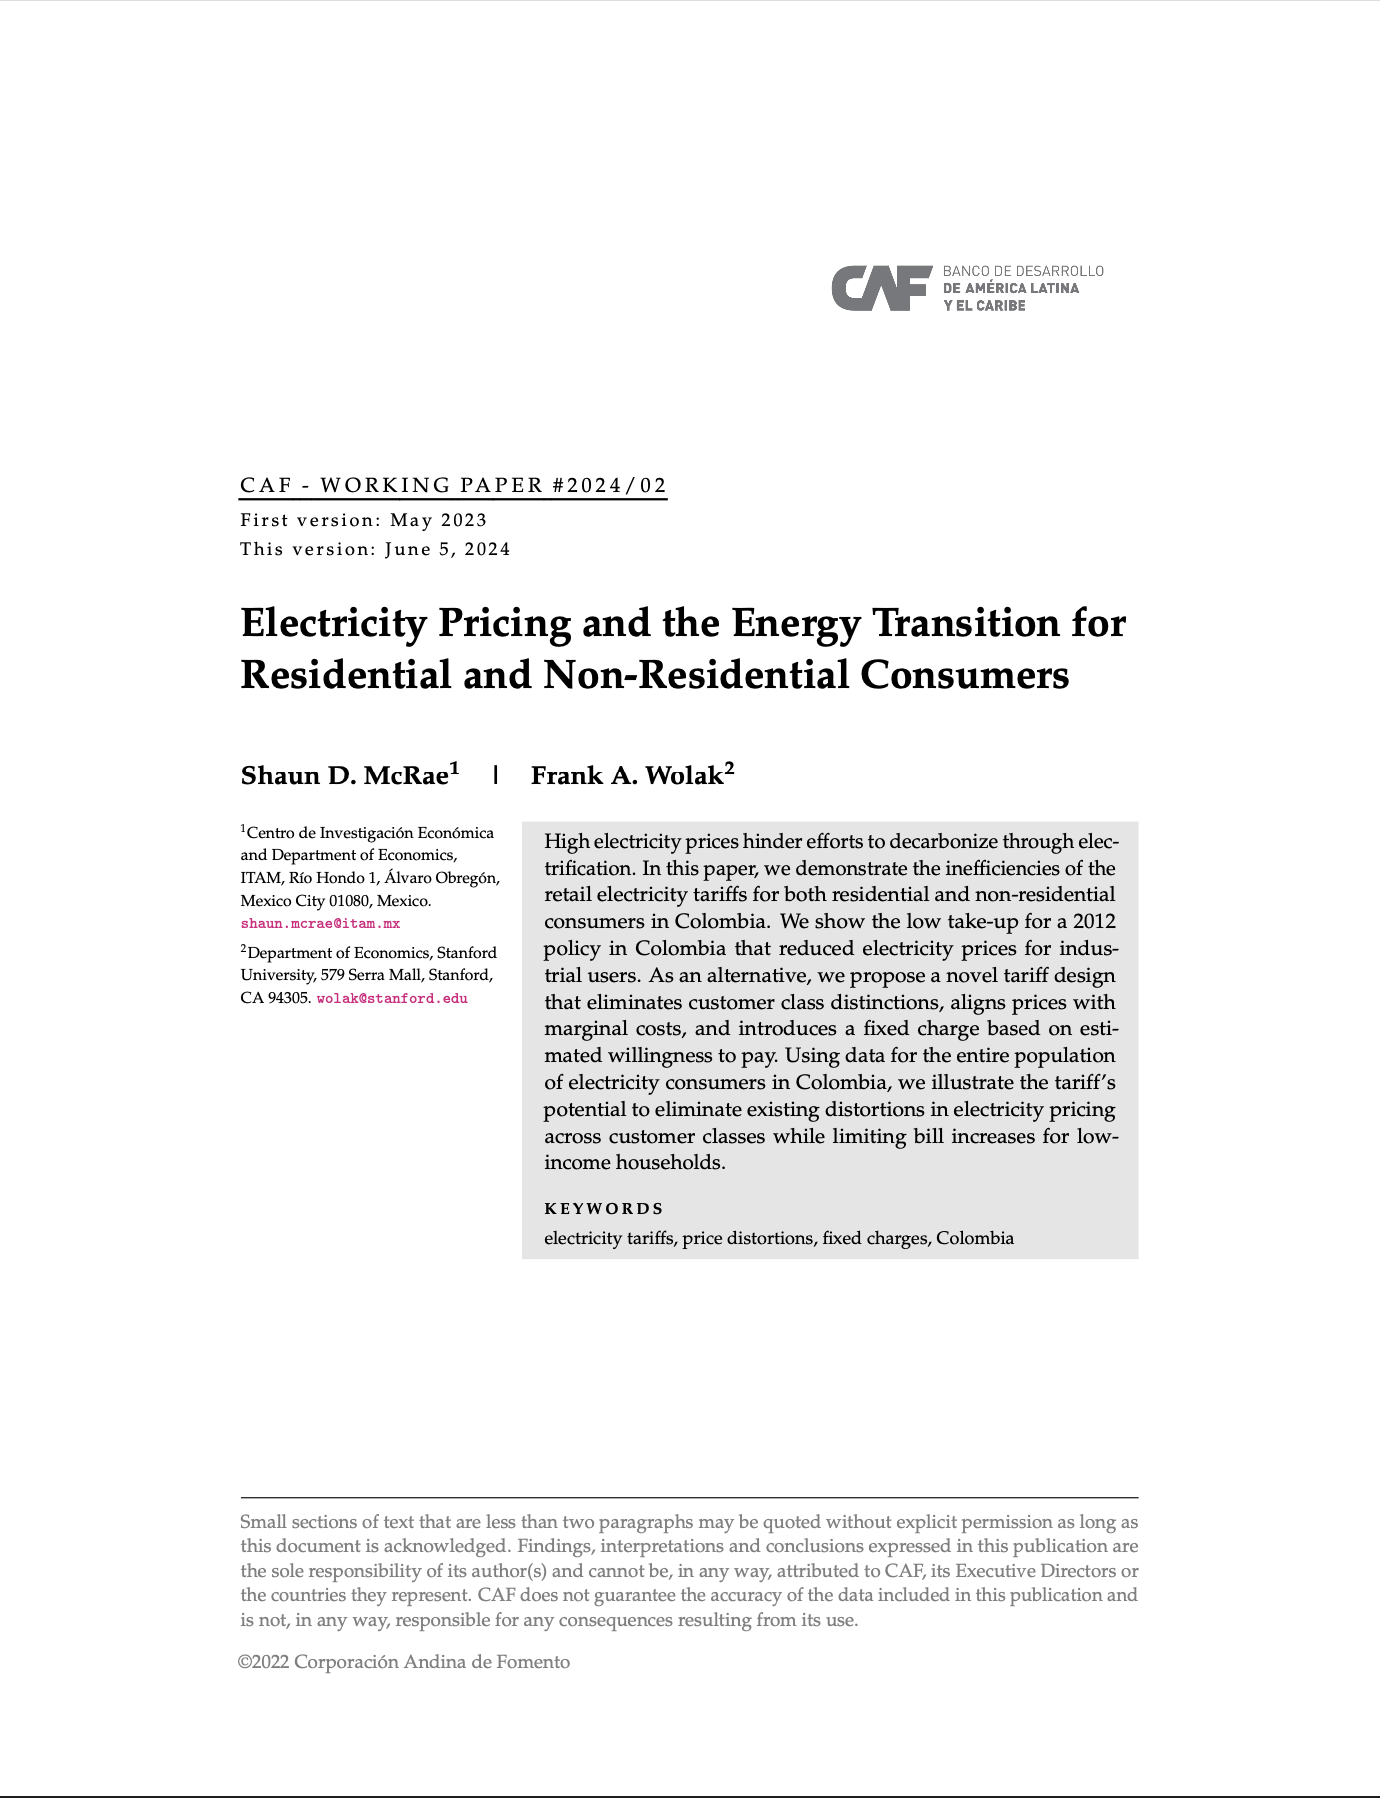 Electricity Pricing and the Energy Transition for Residential and Non-Residential Consumers